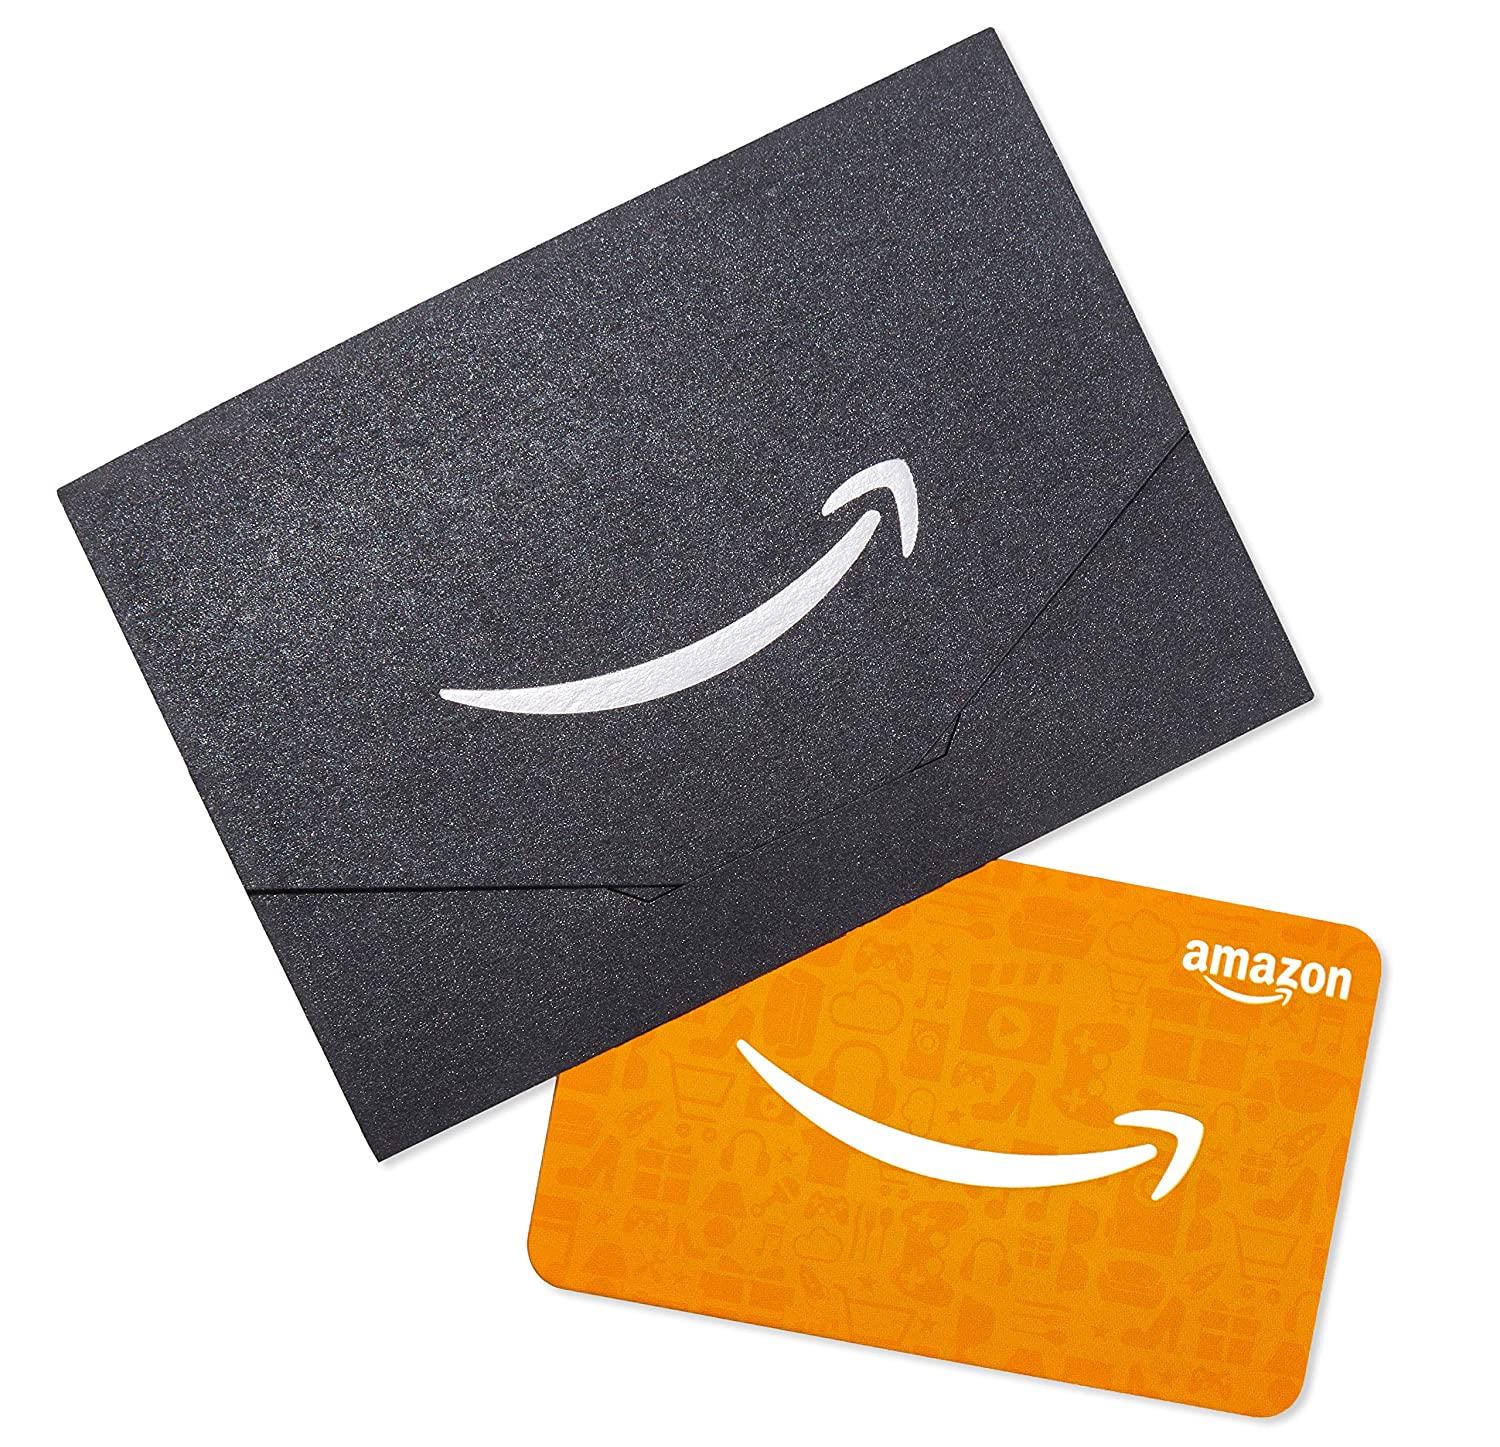 Free $12.50 Amazon Credit When You Buy a $50 Amazon Gift Card